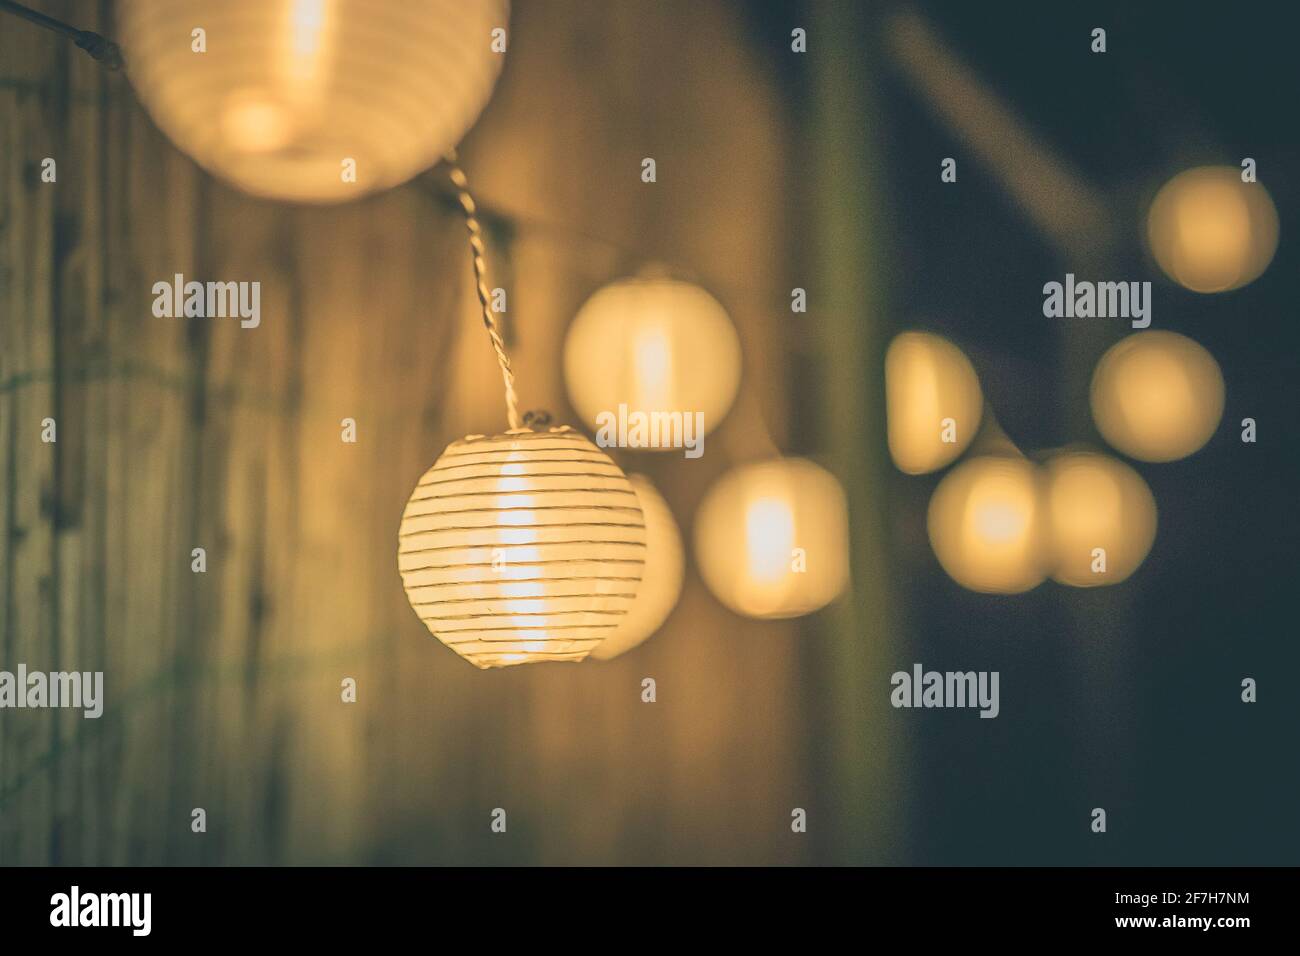 Round Paper Lanterns High Resolution Stock Photography and Images - Alamy